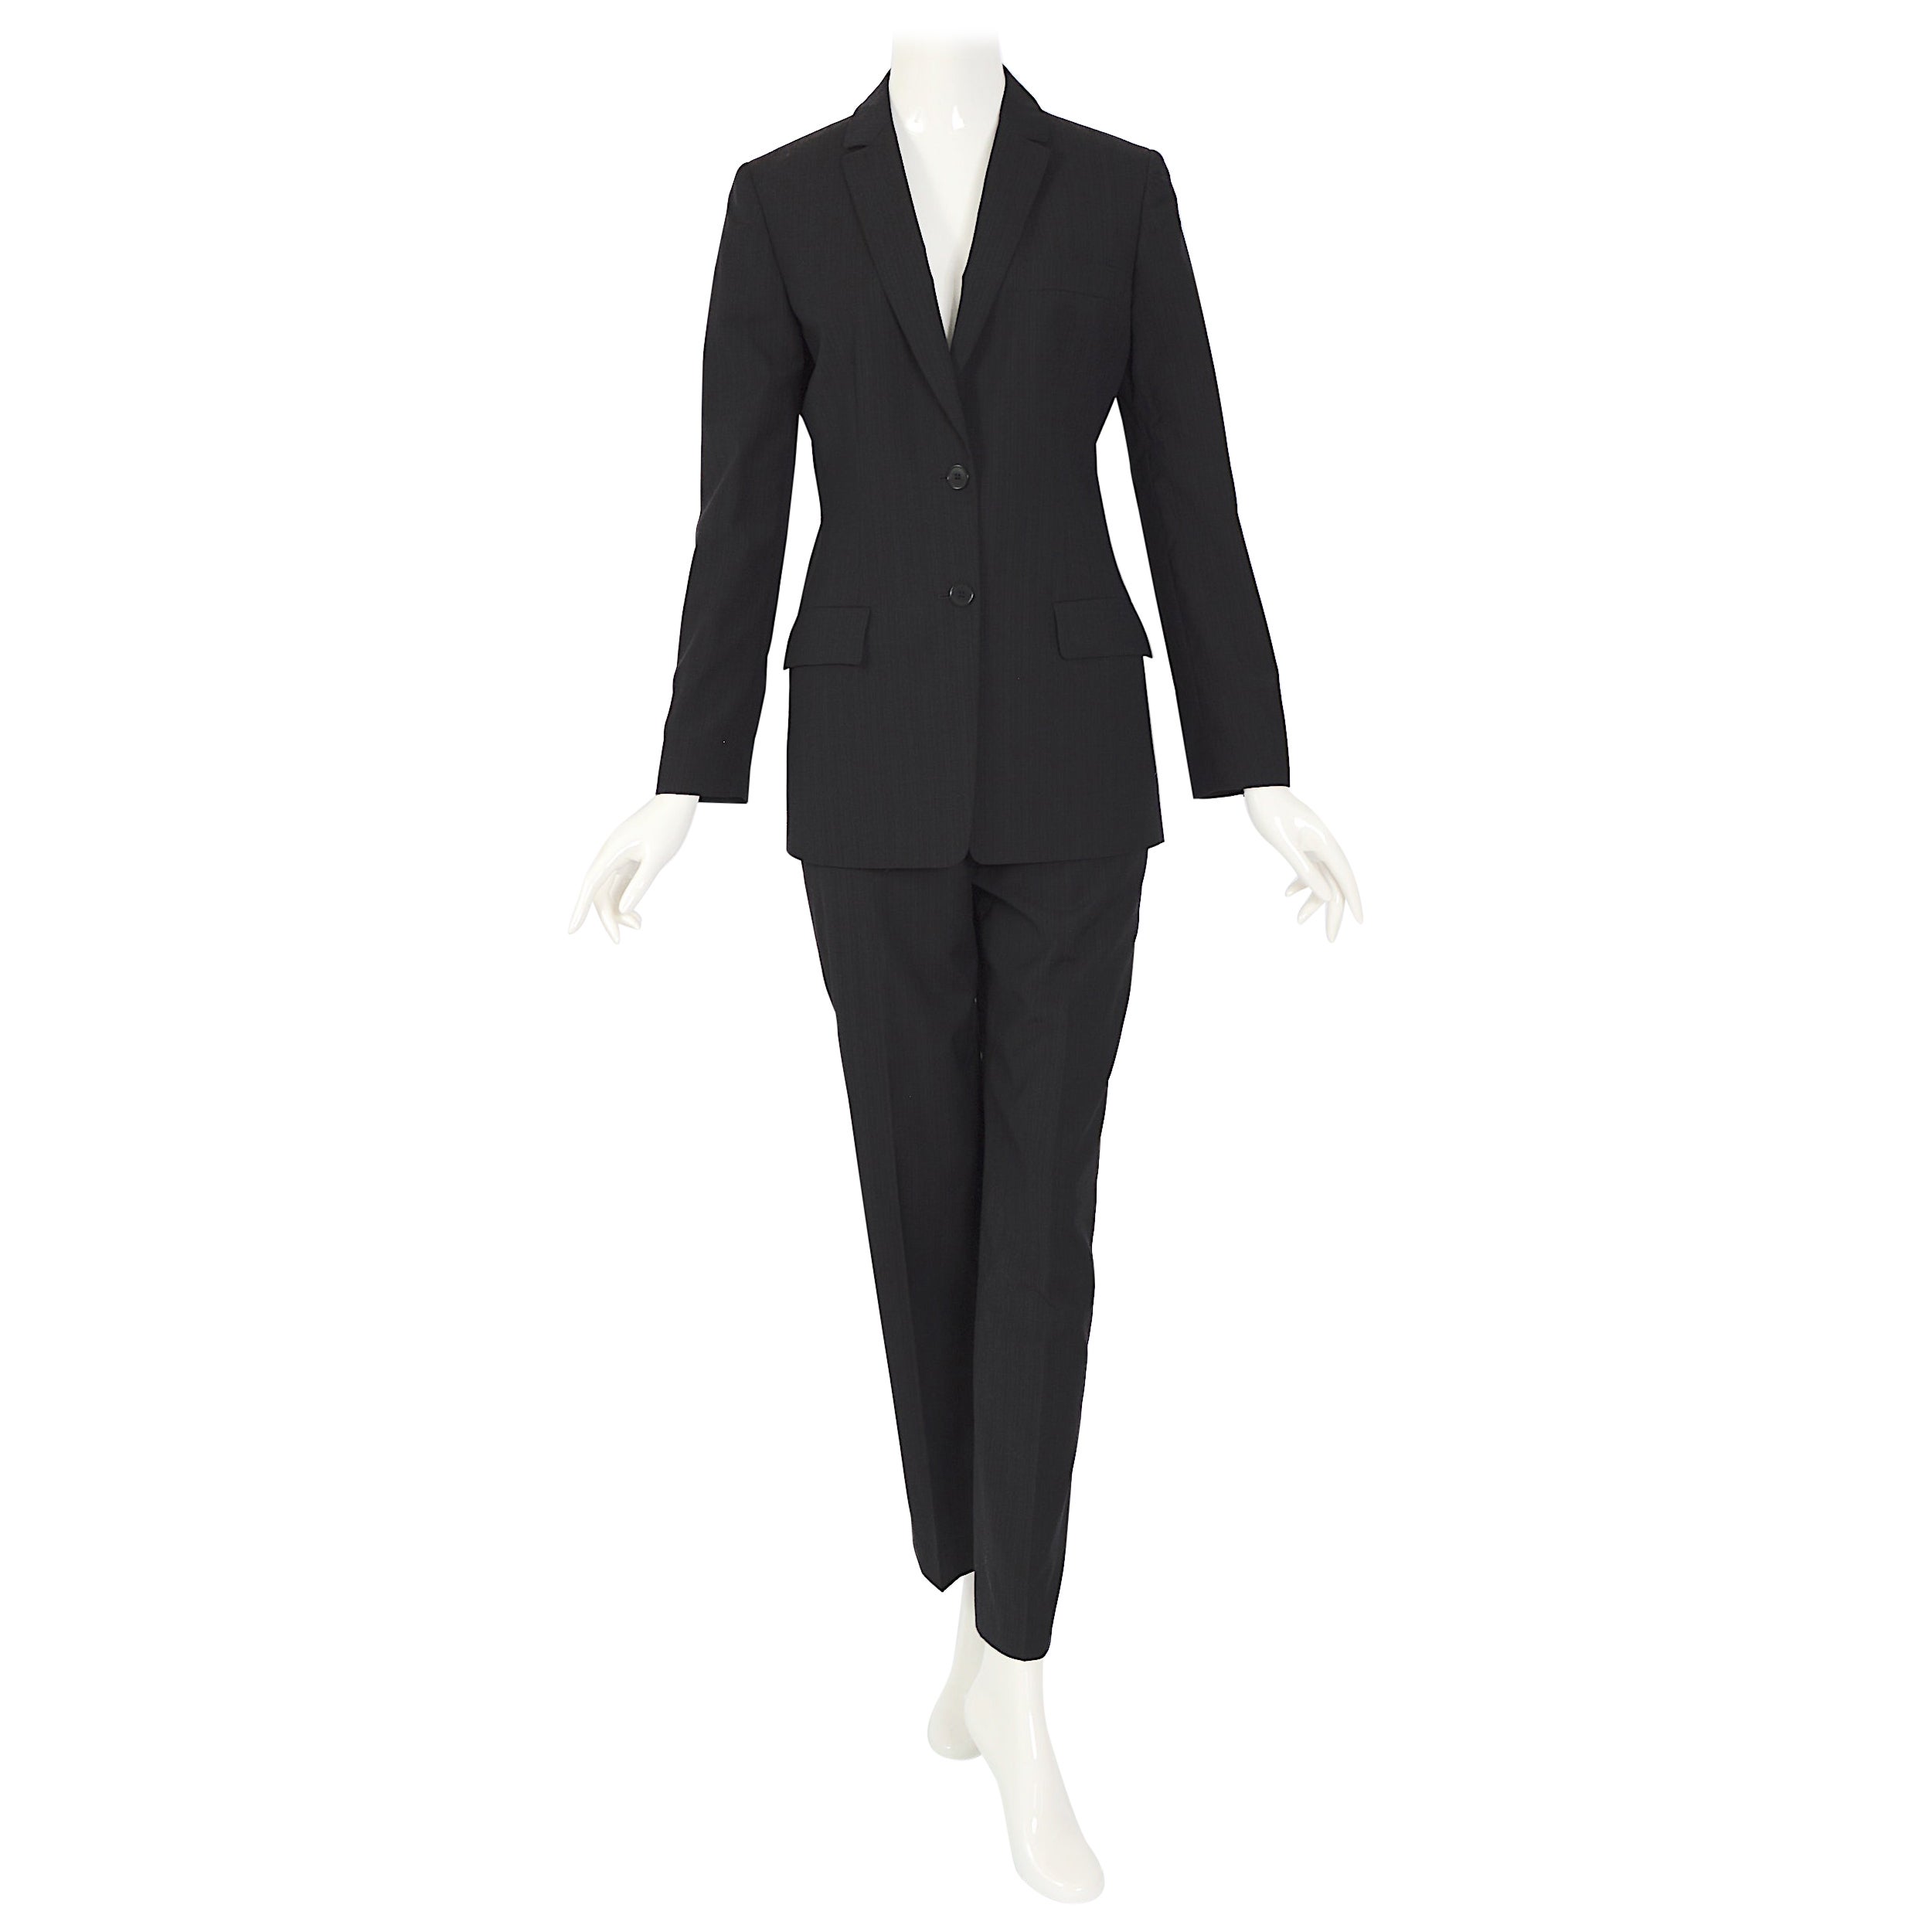 Calvin Klein collection by Calvin Klein vintage 1990's tailored pin stripe suit For Sale